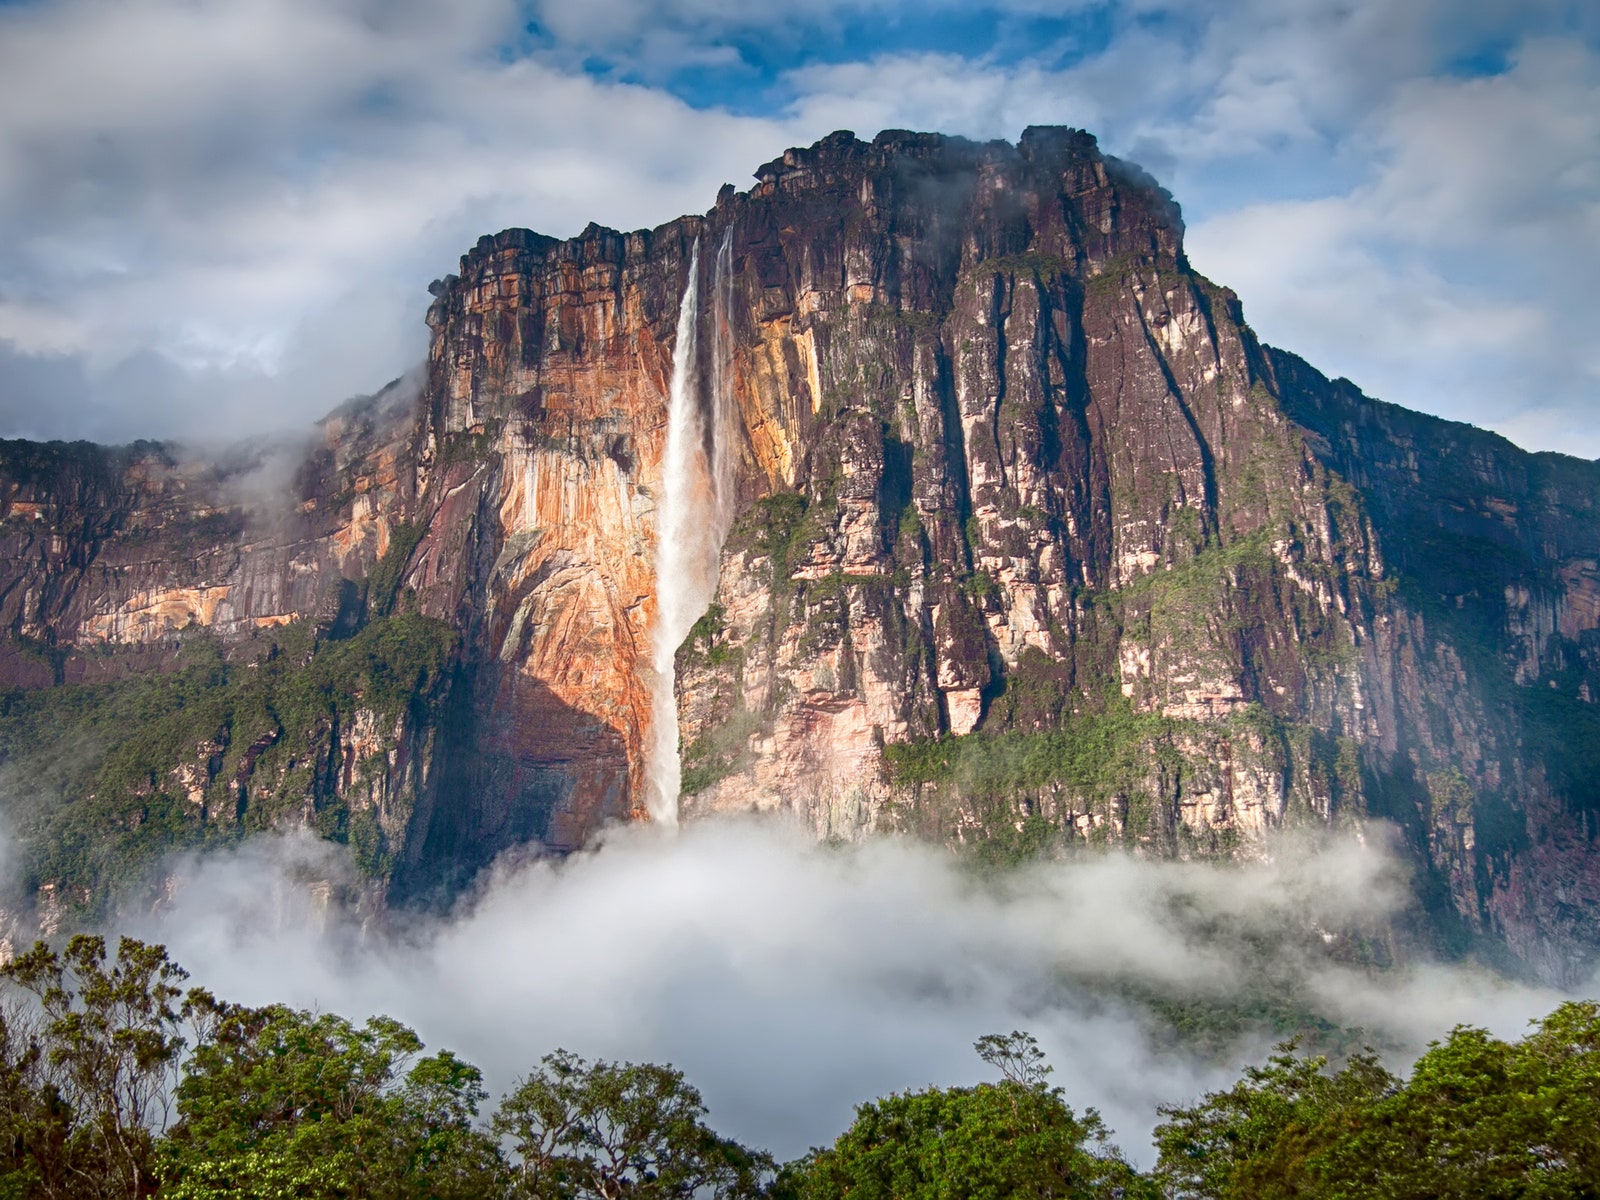 I’ll Be Frickin’ Impressed If You Can Score 20/20 on This Geography Quiz Angel Falls waterfall, Venezuela